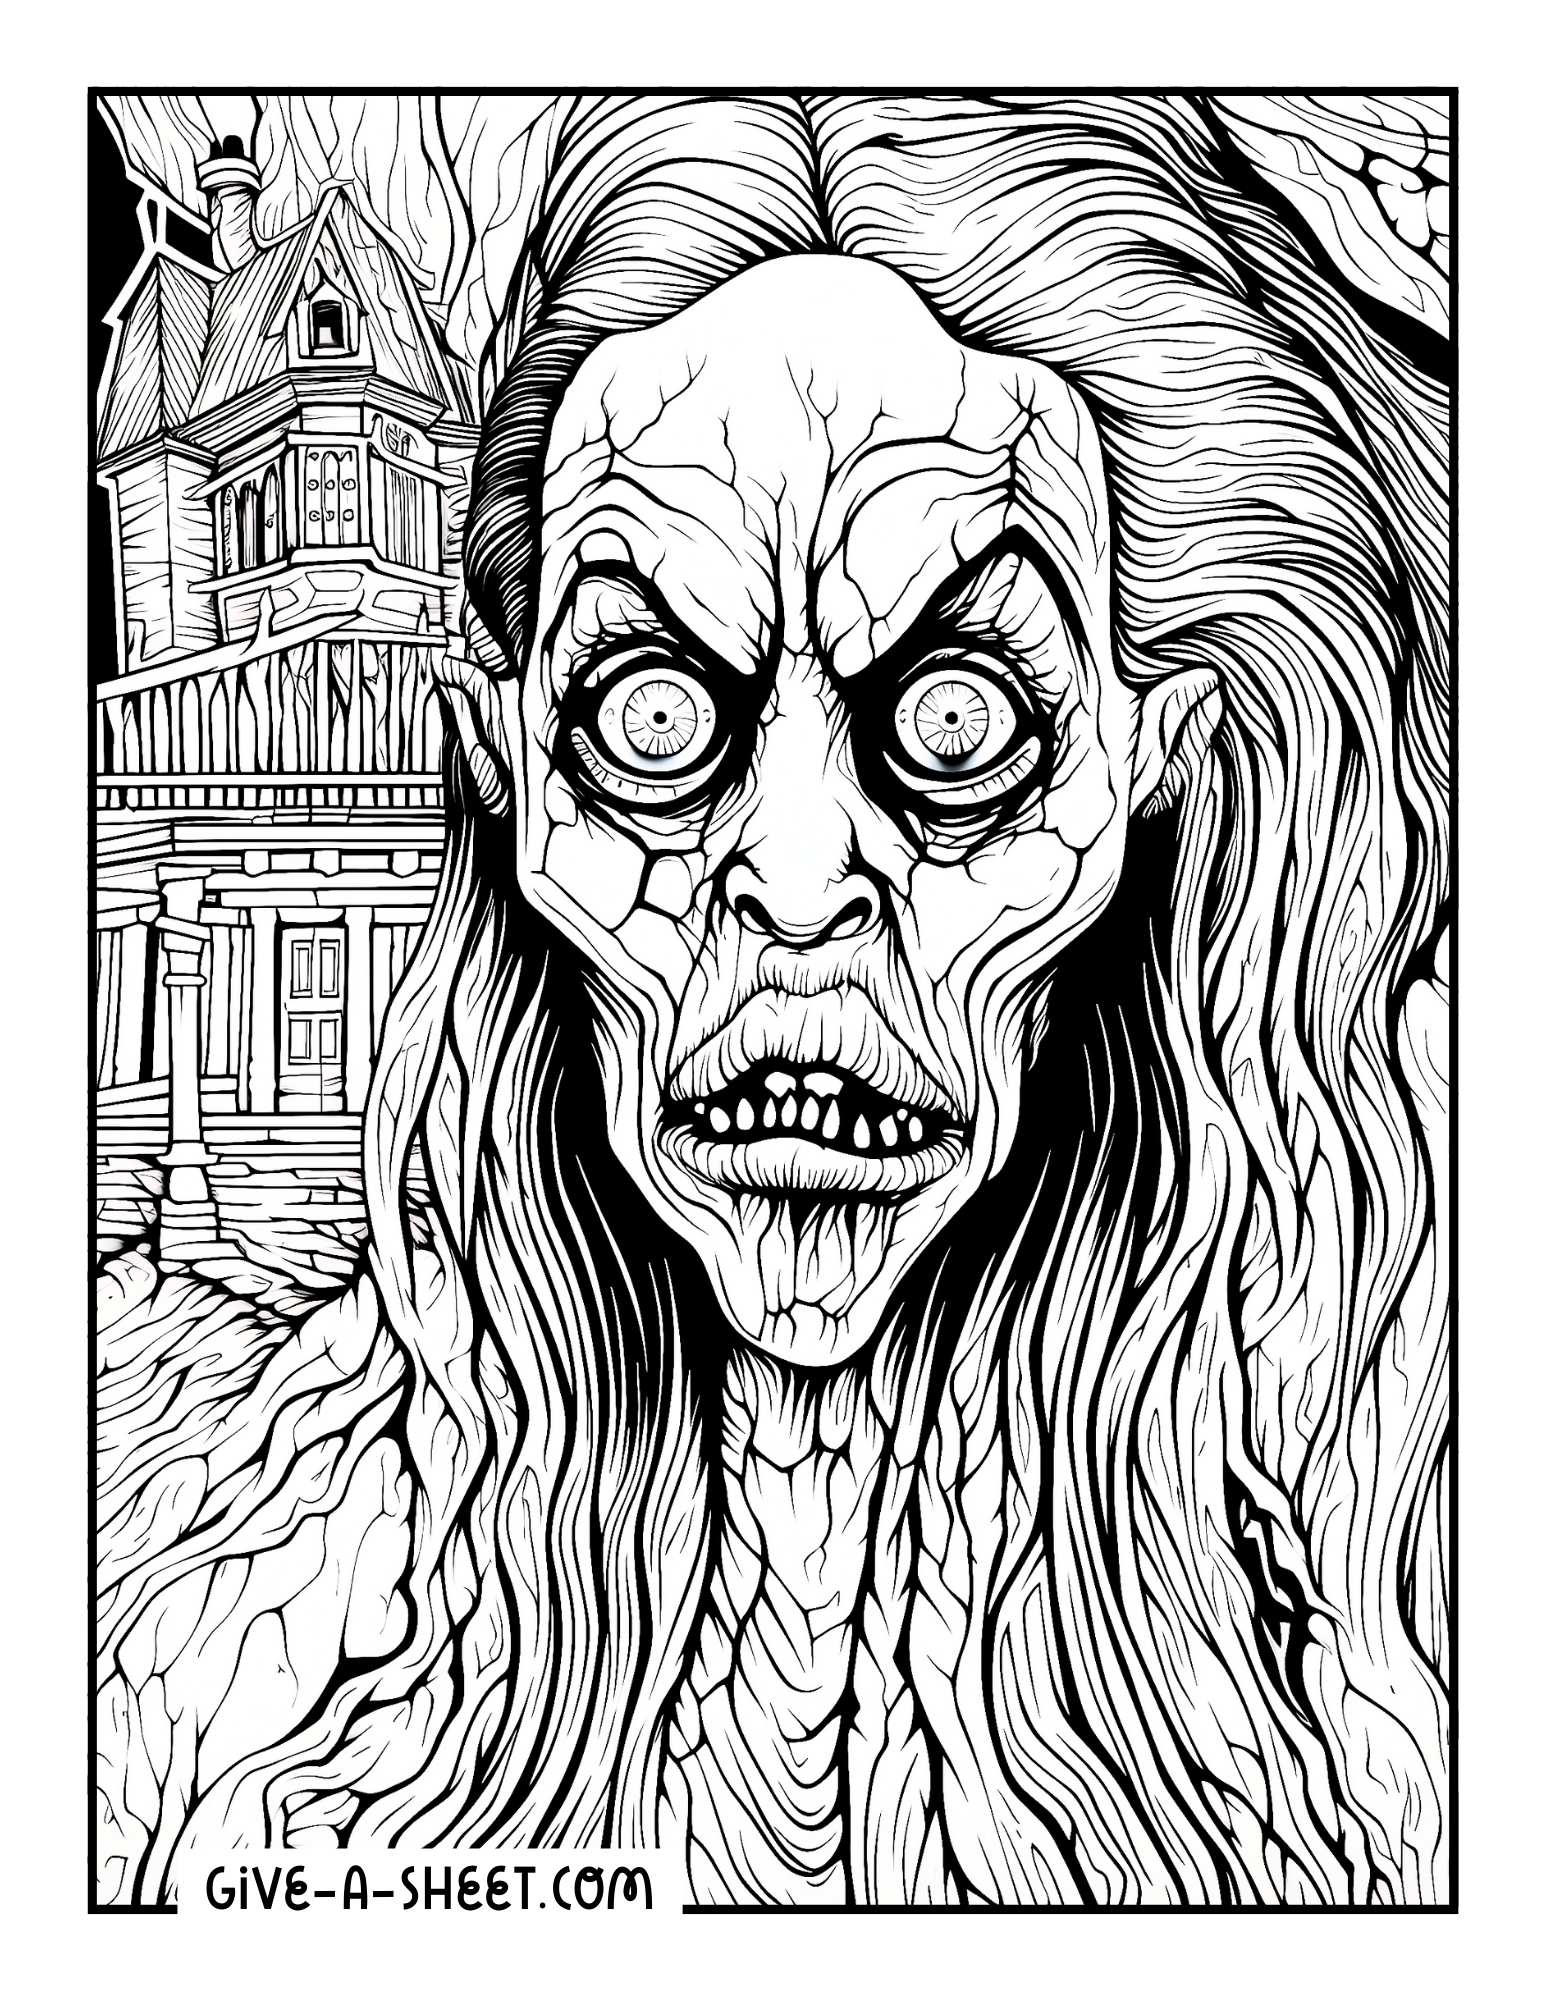 Woman with a haunted house at the back coloring page.